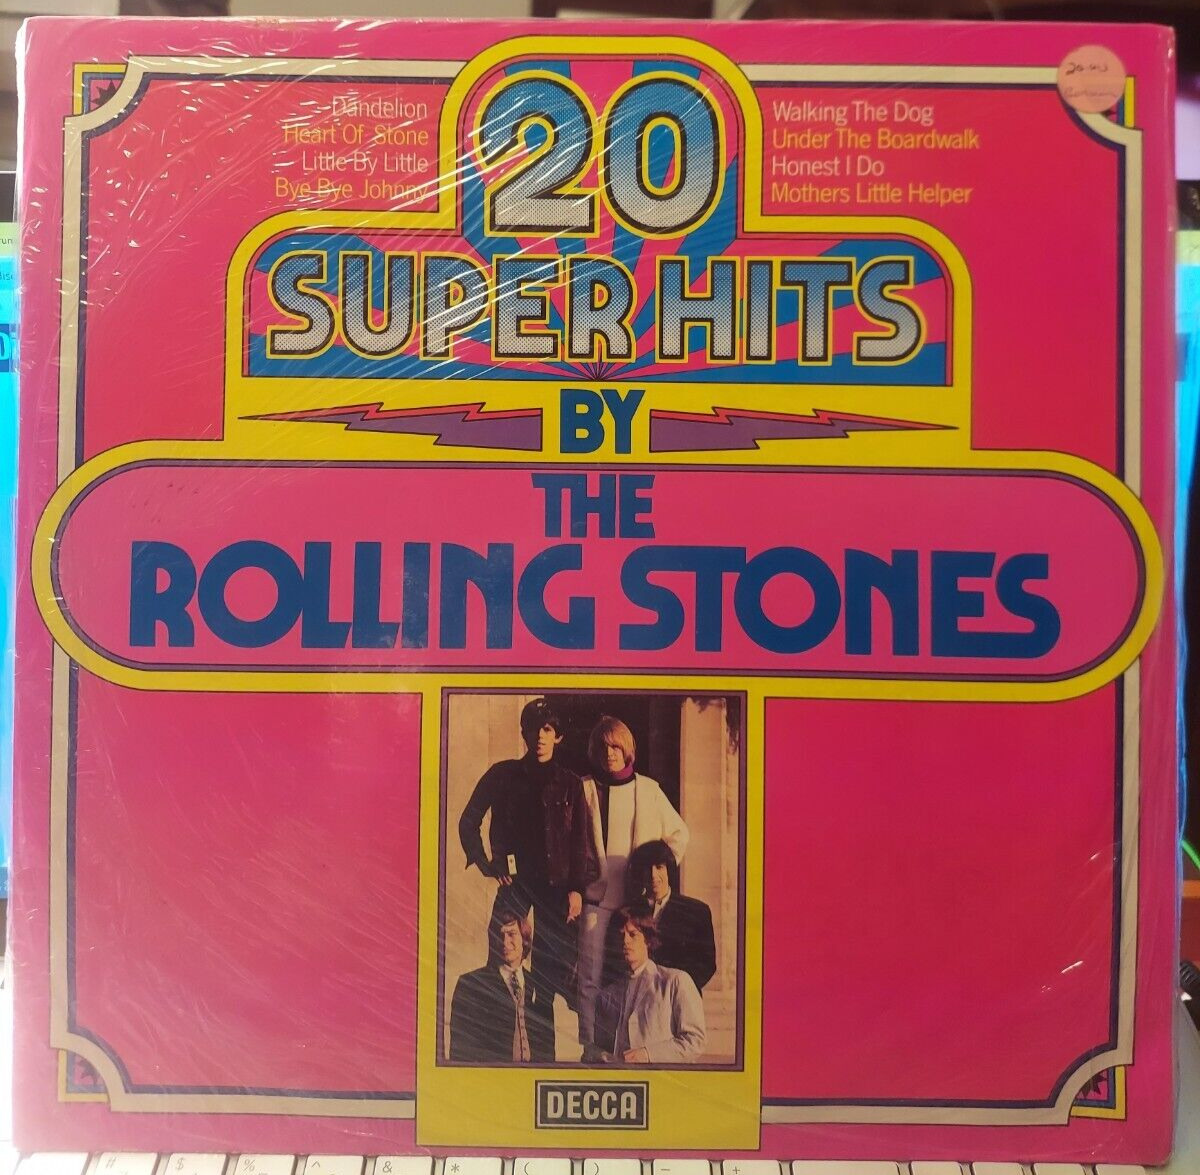 THE ROLLING STONES-20 Super Hits By The Rolling Stones-DECCA 6.23502 IMPORT✨MINT